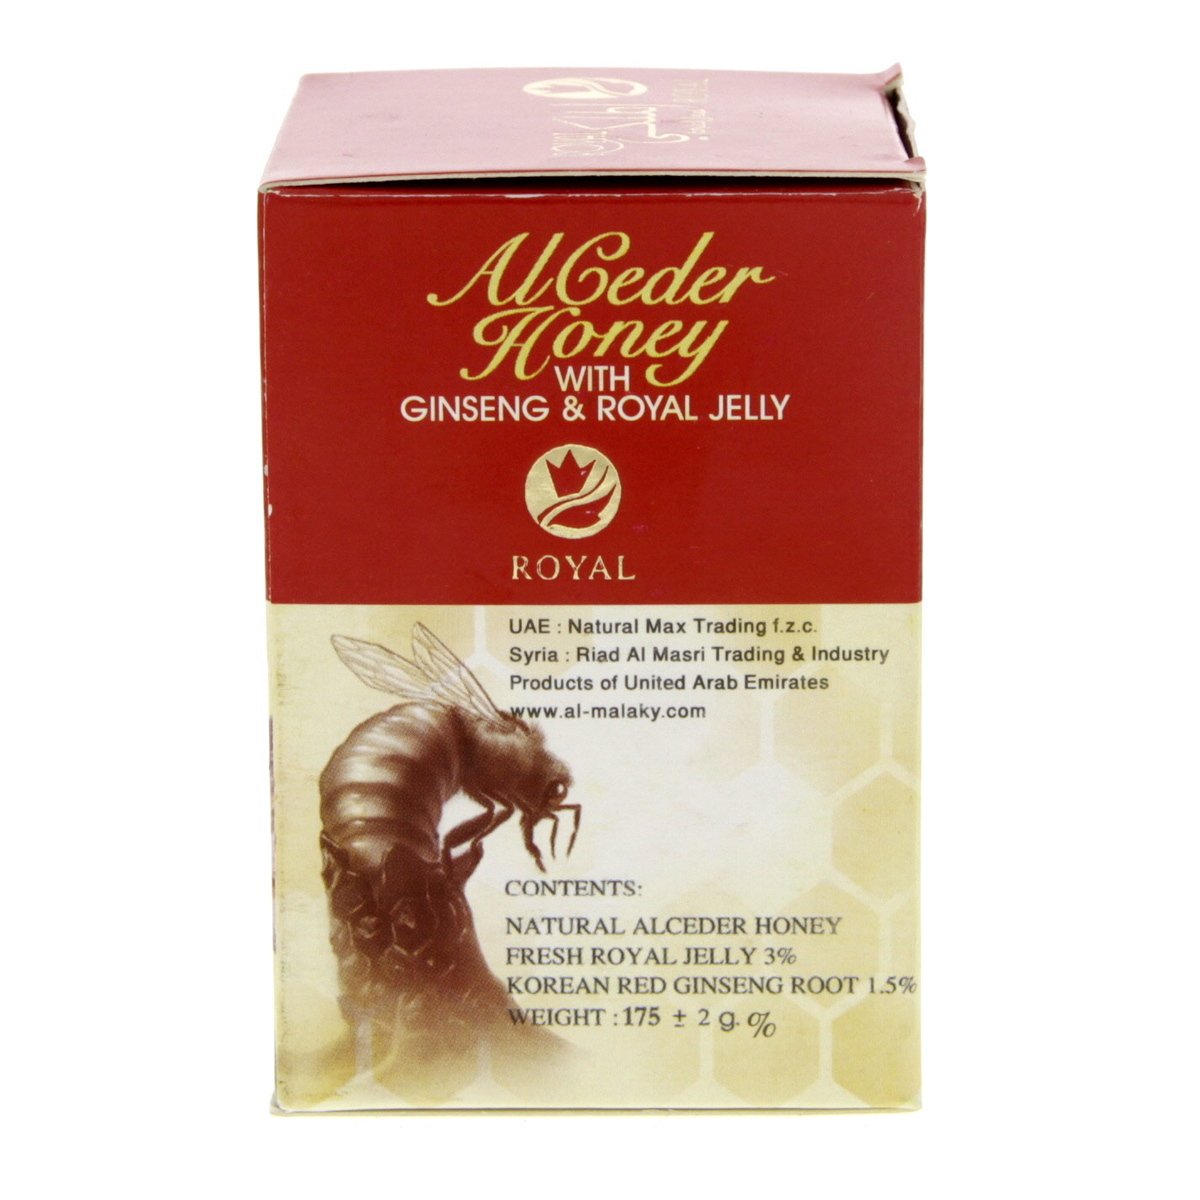 Al Ceder Honey With Ginseng & Royal Jelly 175 g